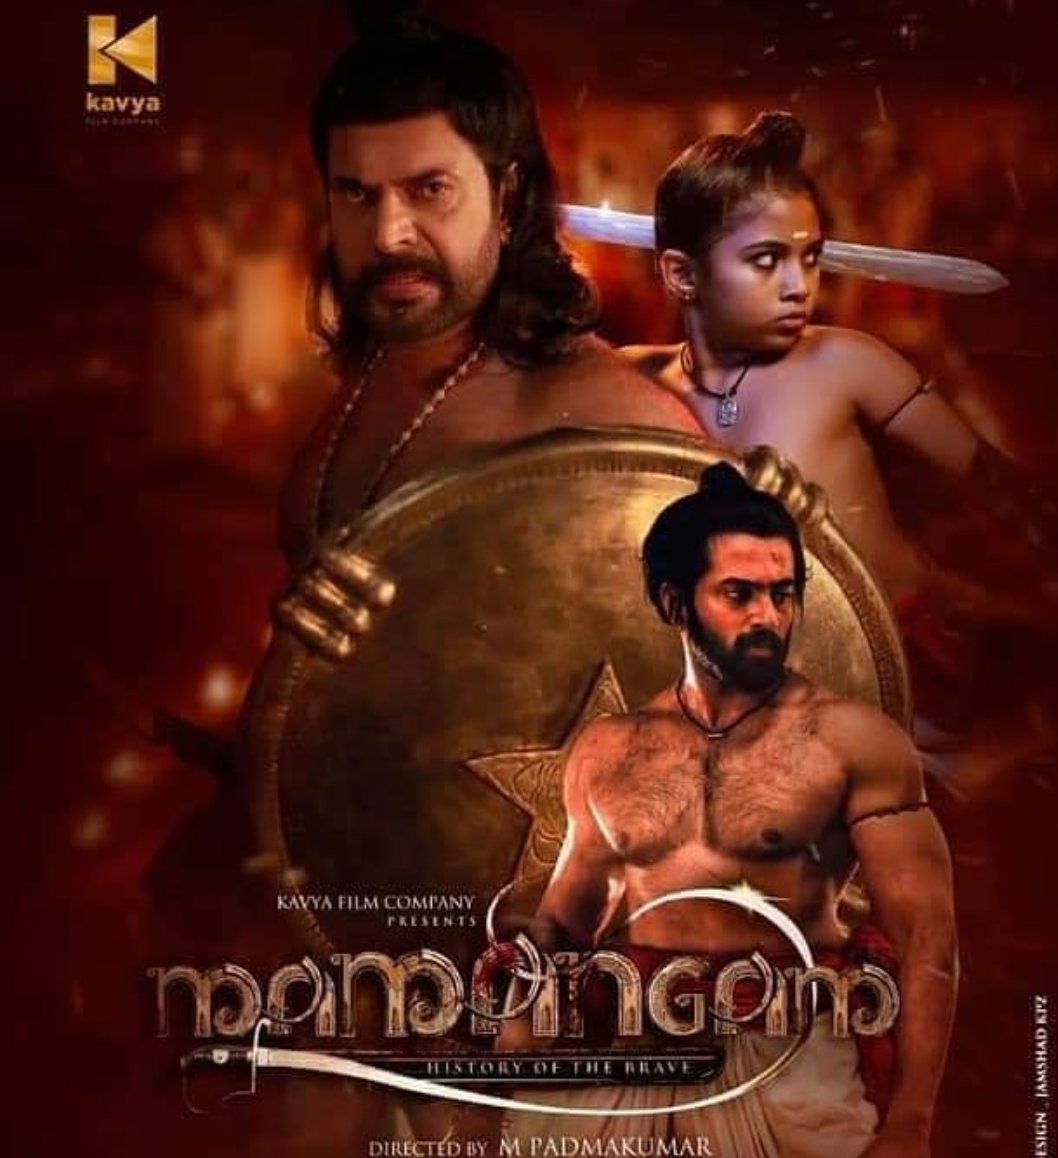 #Mamangam 5*****
@mammukka's feminine costume was a delighter for all #MammootyFans.
@mammukka as usual his acting in this movie has no words. #Unnimukudan & #Manikuttan both have done their part best. The amazing part is, the stunts of the child artist is superb & truly amazing.